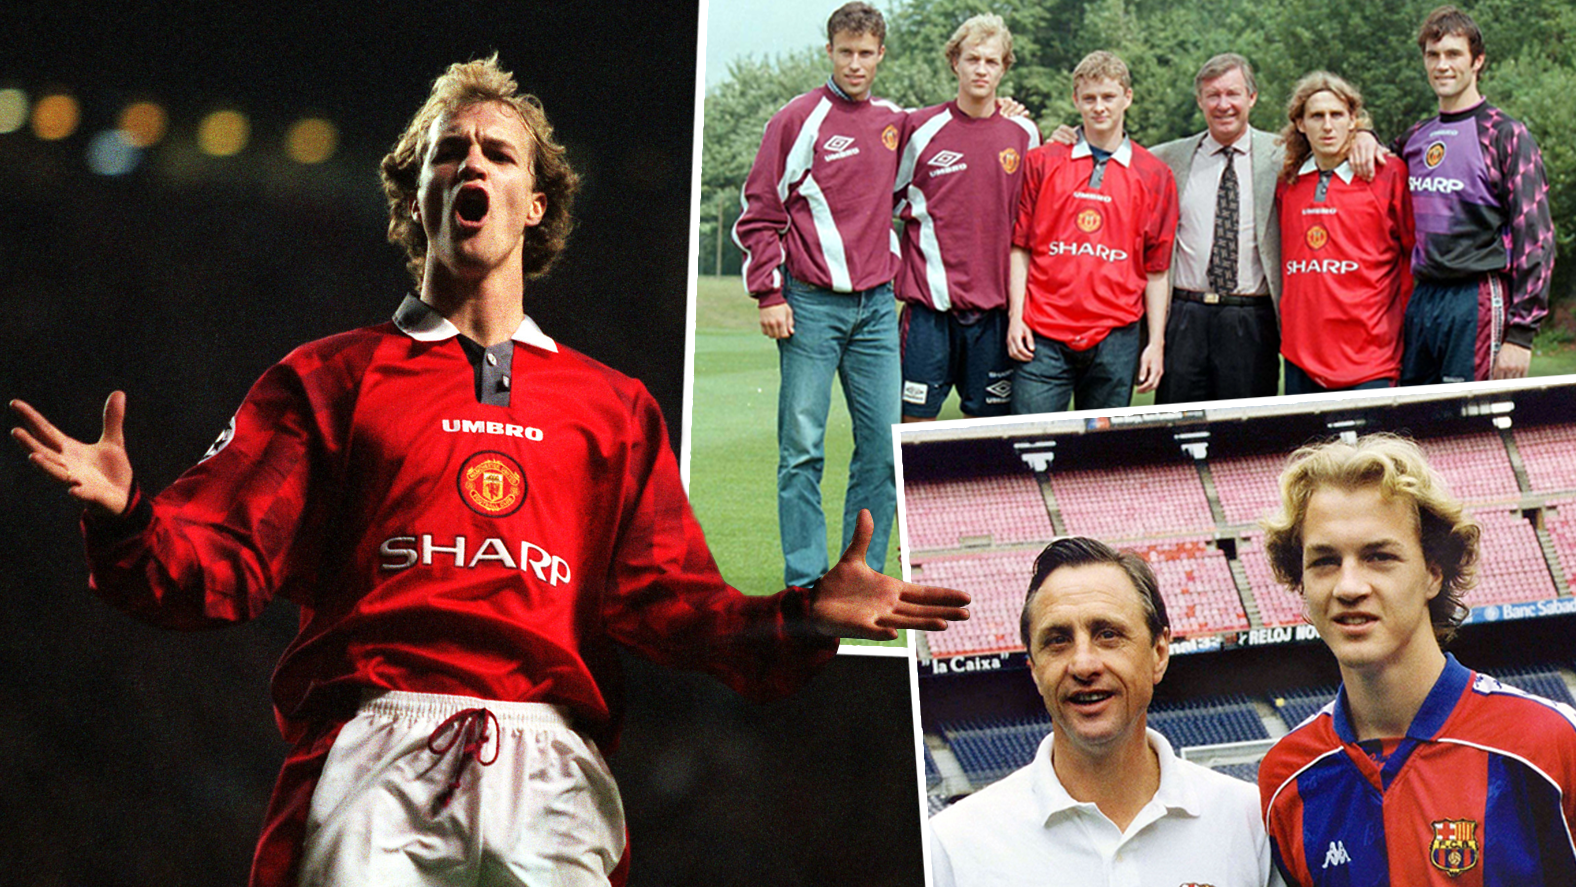 “Ole Gunnar Solskjær is like Pep Guardiola – he knows his club’s DNA”, Jordi Cruyff talks all things football with The Times